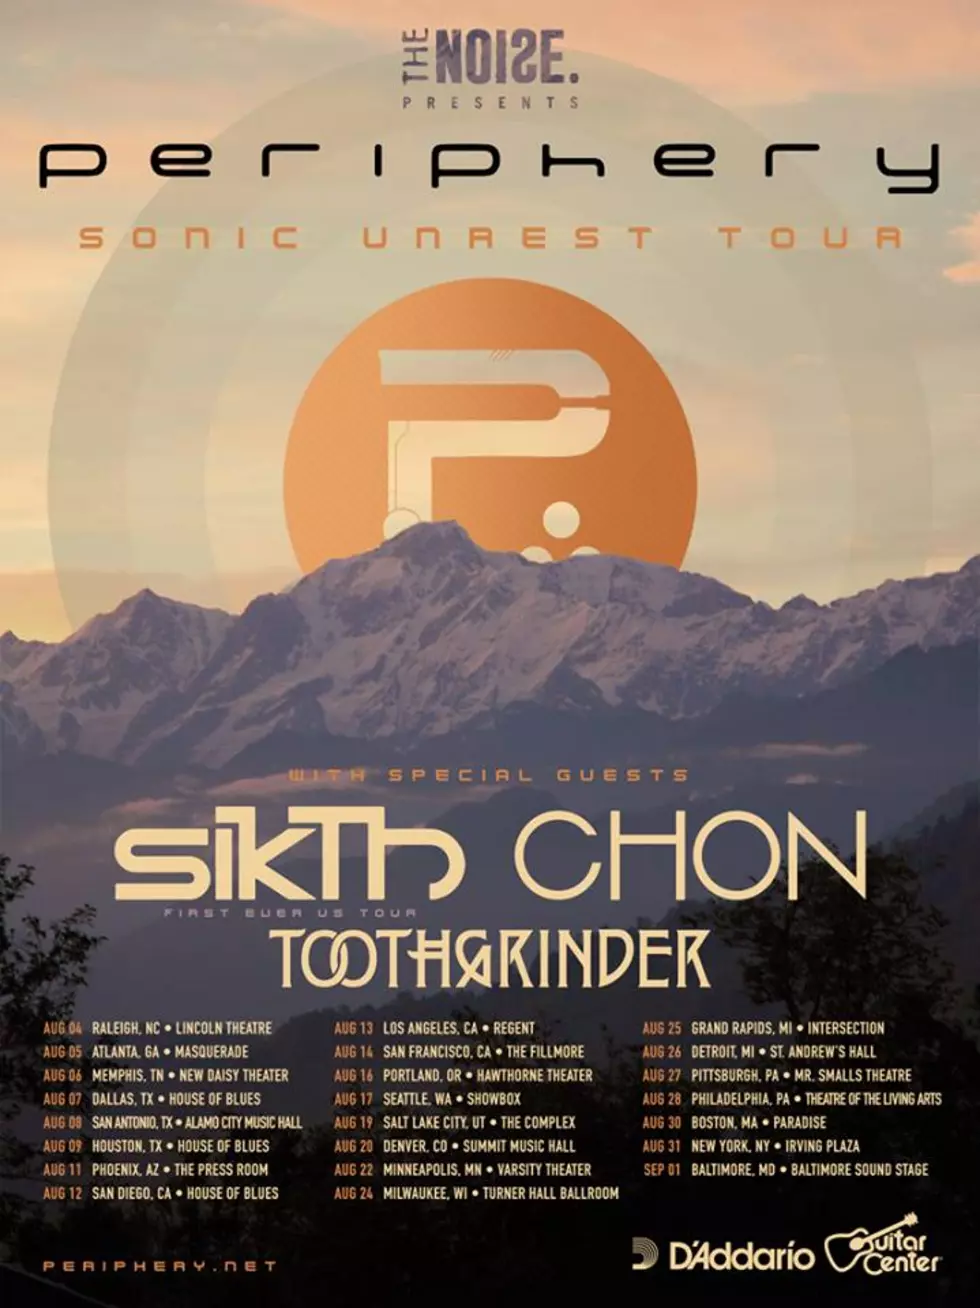 Periphery &#8211; Sikth &#8211; Chon &#8211; Toothgrinder @ the Intersection